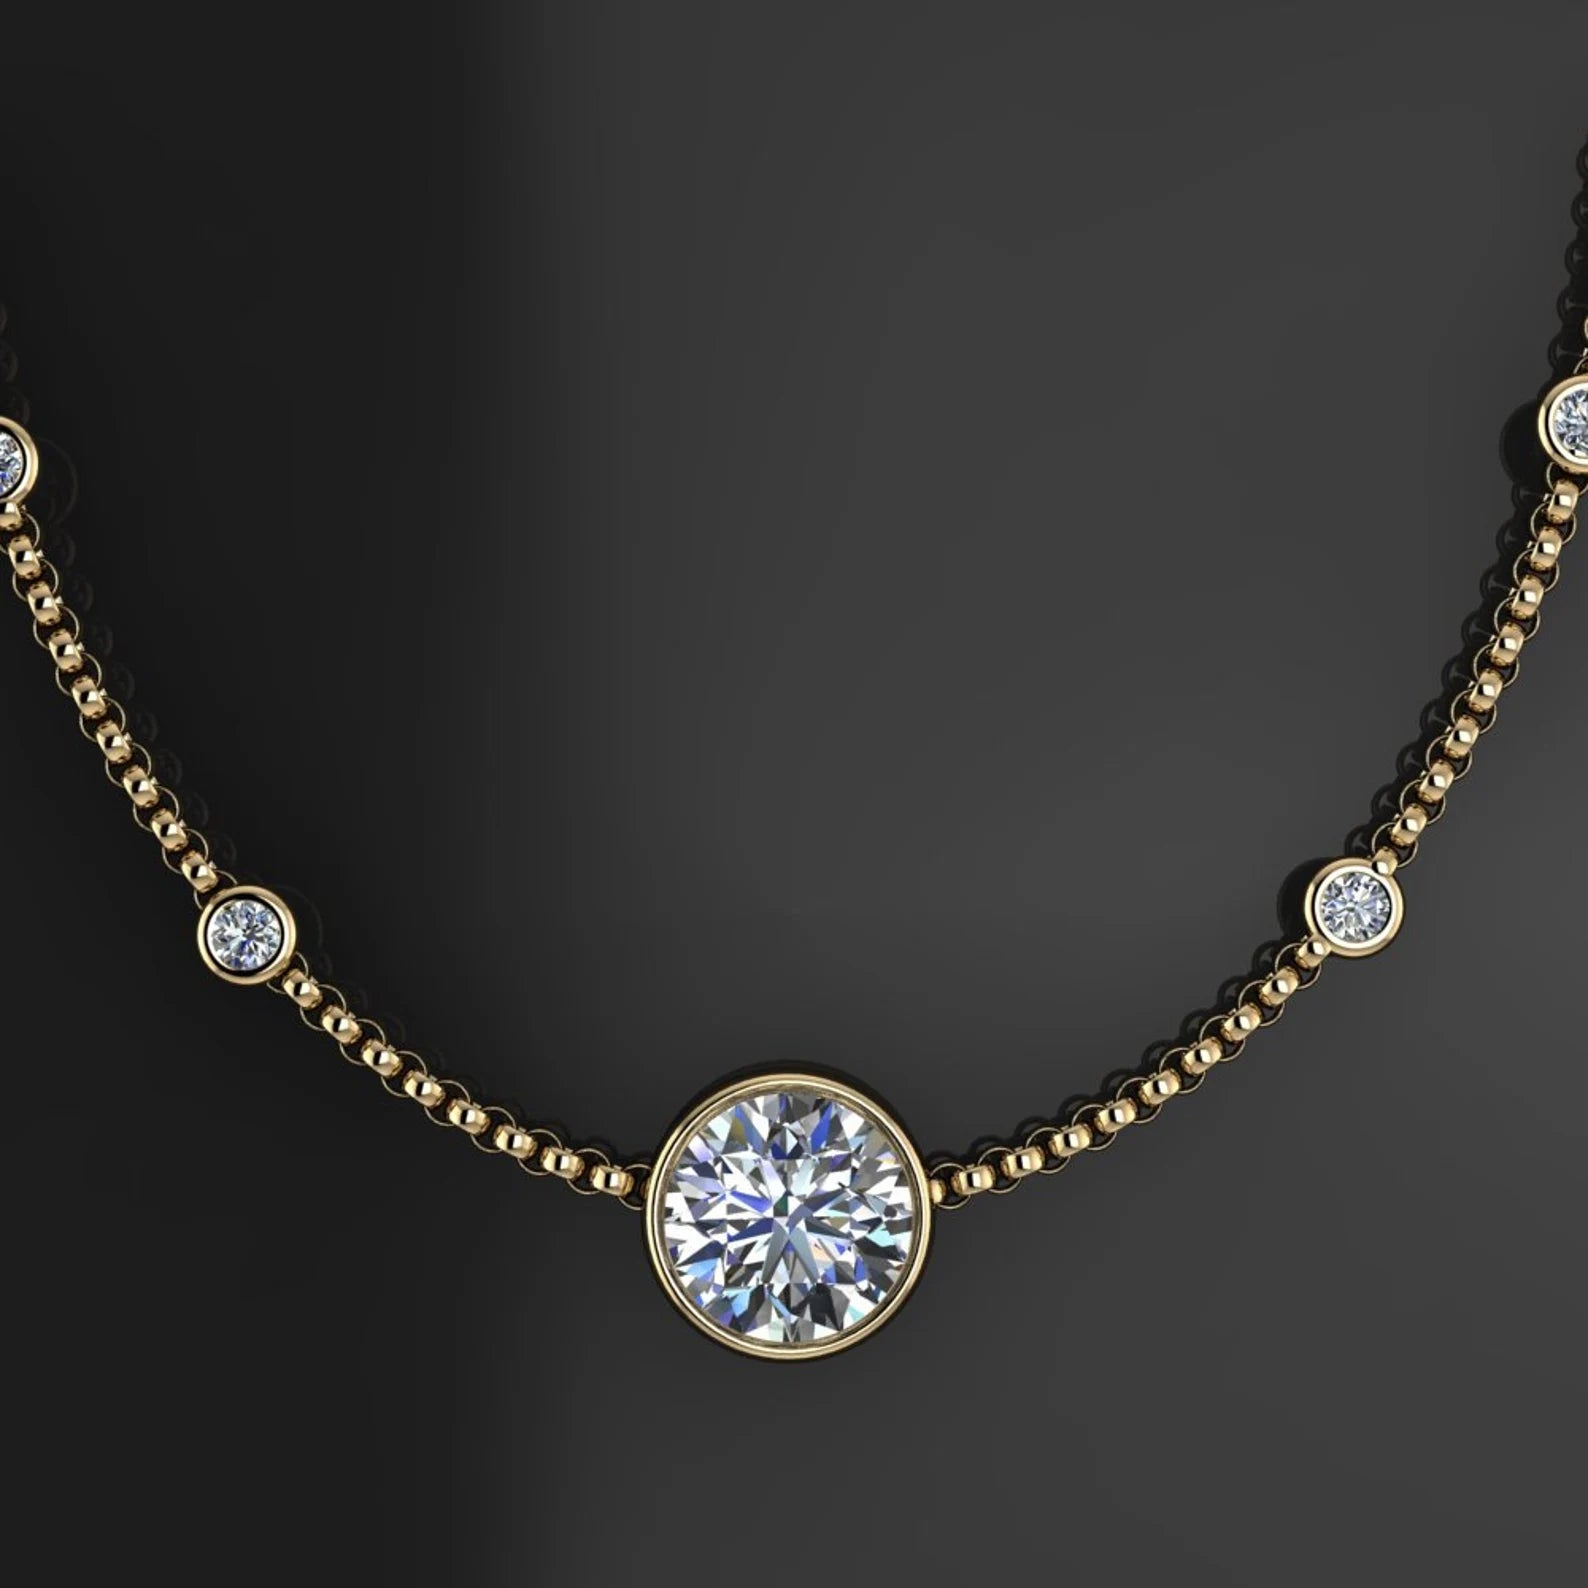 josephine necklace - 1.5 carat center round NEO moissanite station necklace - J Hollywood Designs